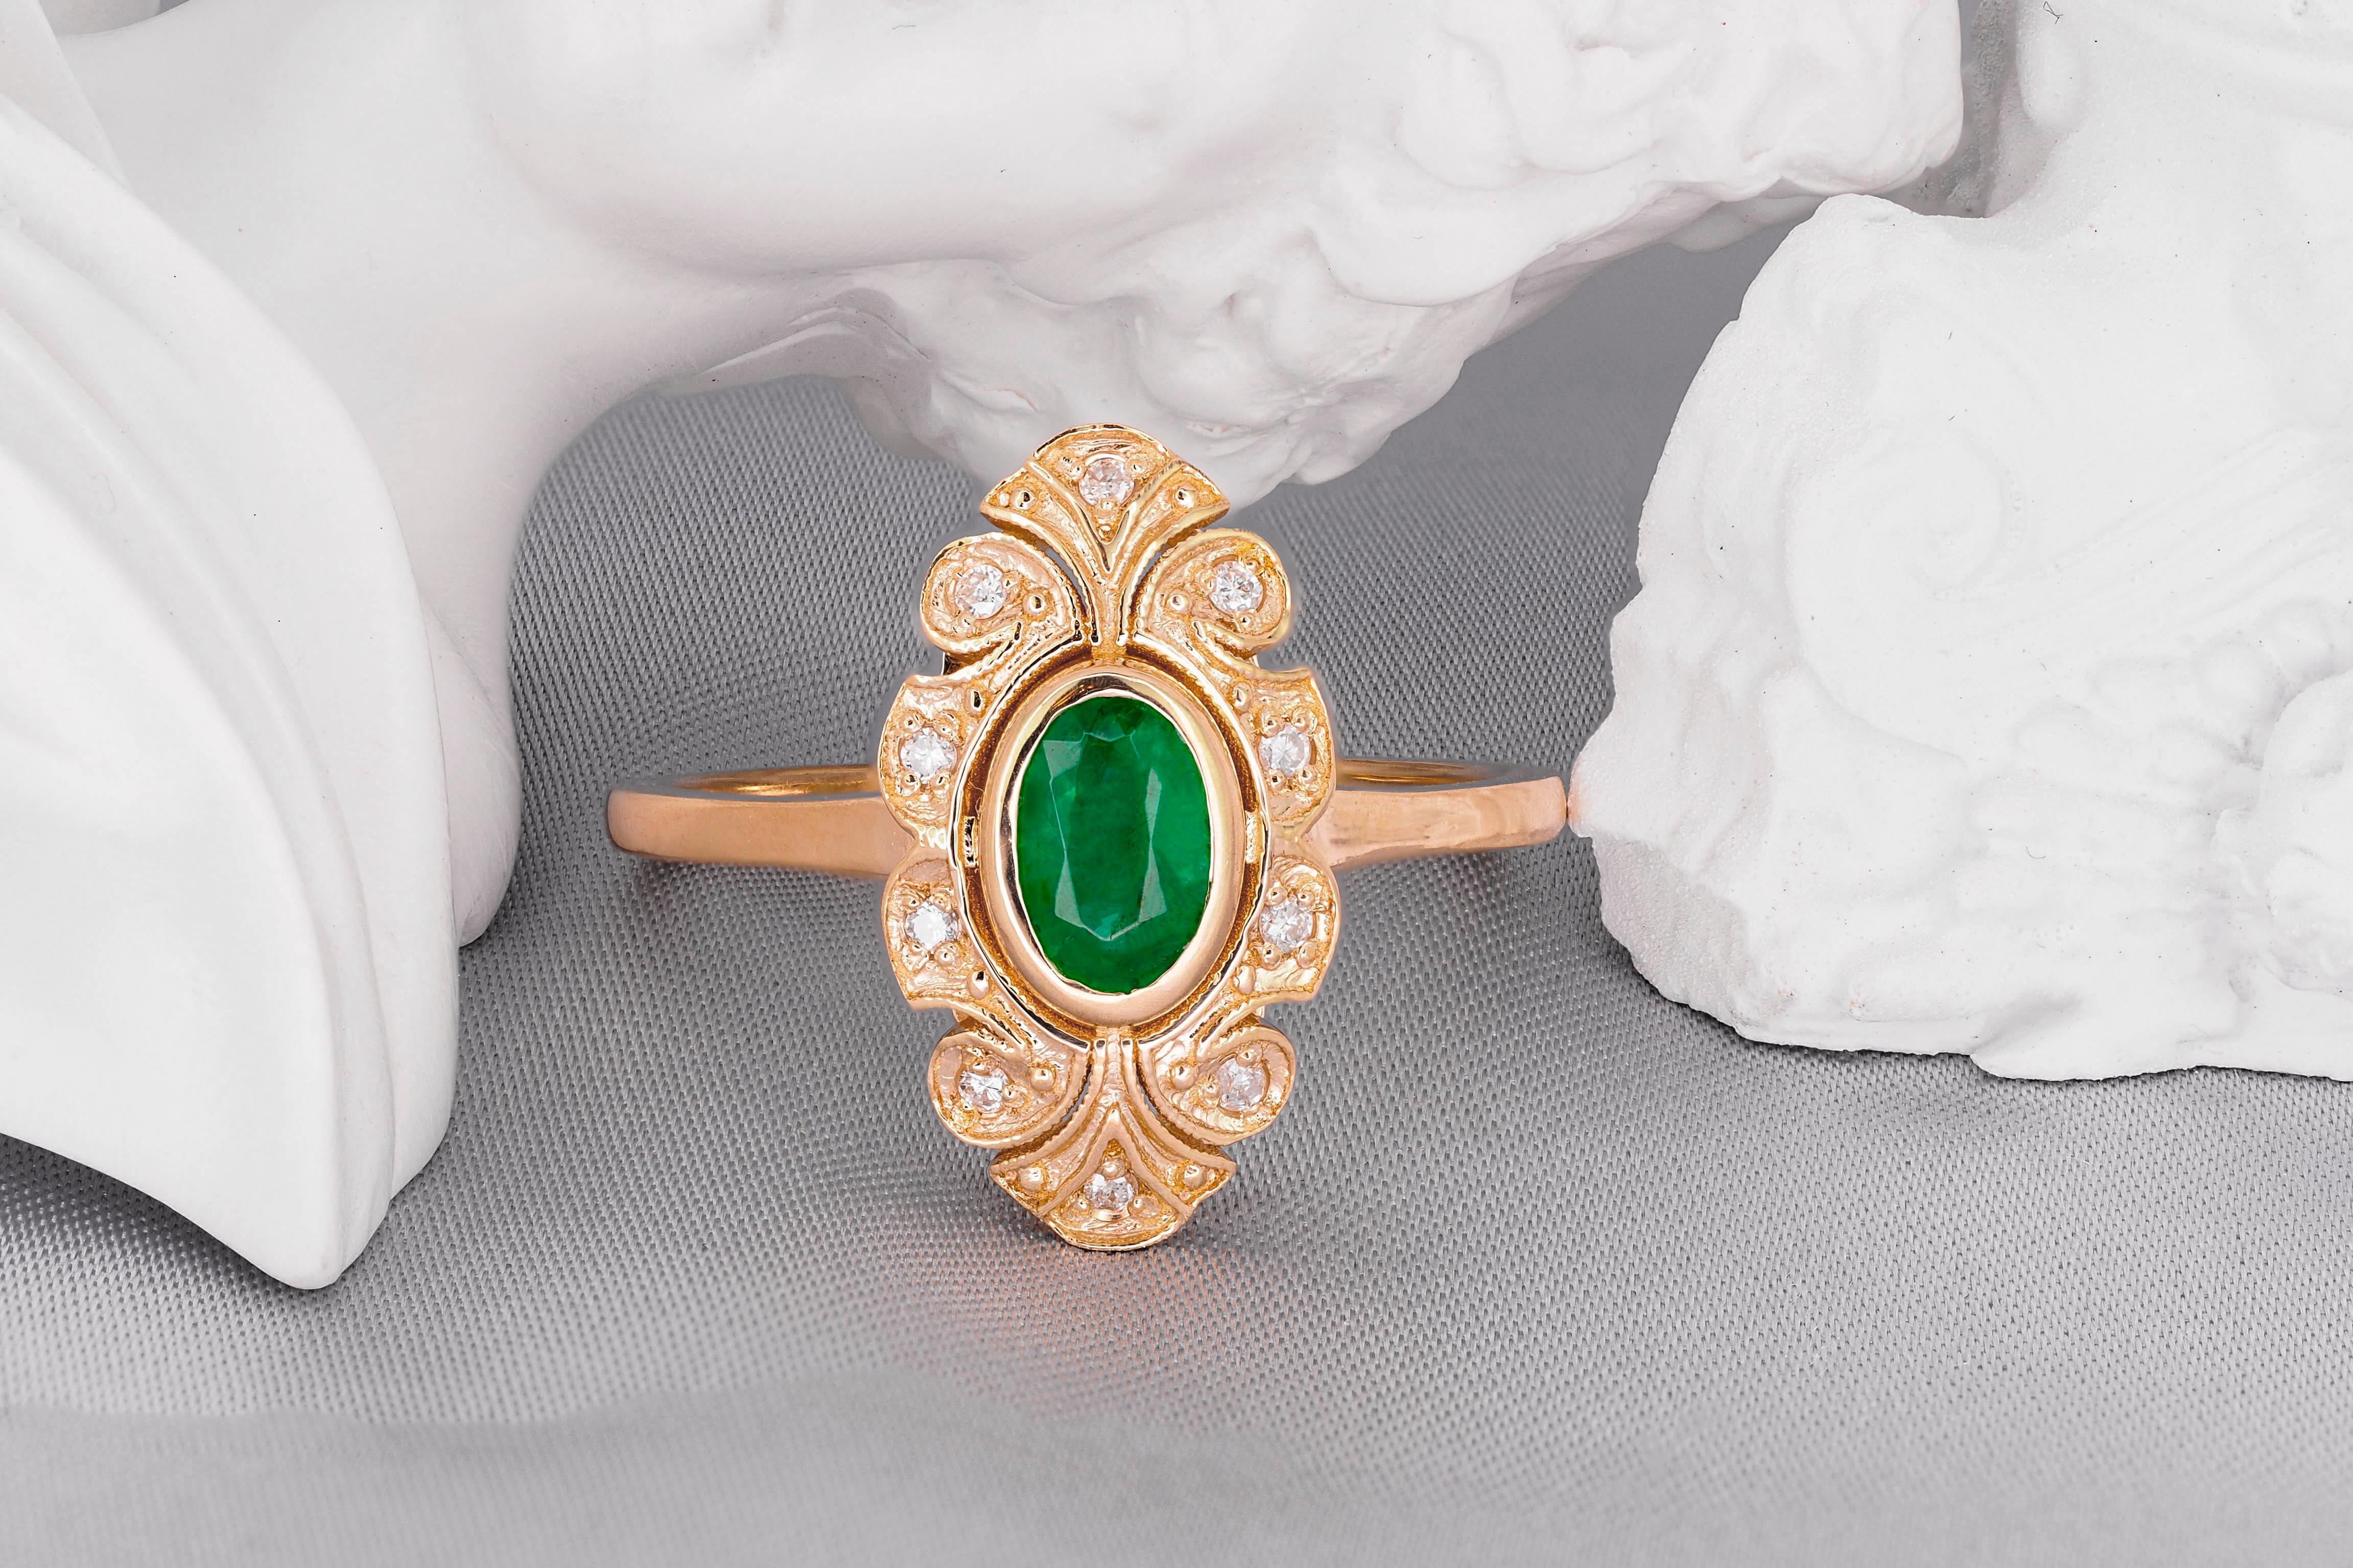 For Sale:  14k Gold Ring with Oval Emerald and Diamonds, Vintage Inspired Ring 6